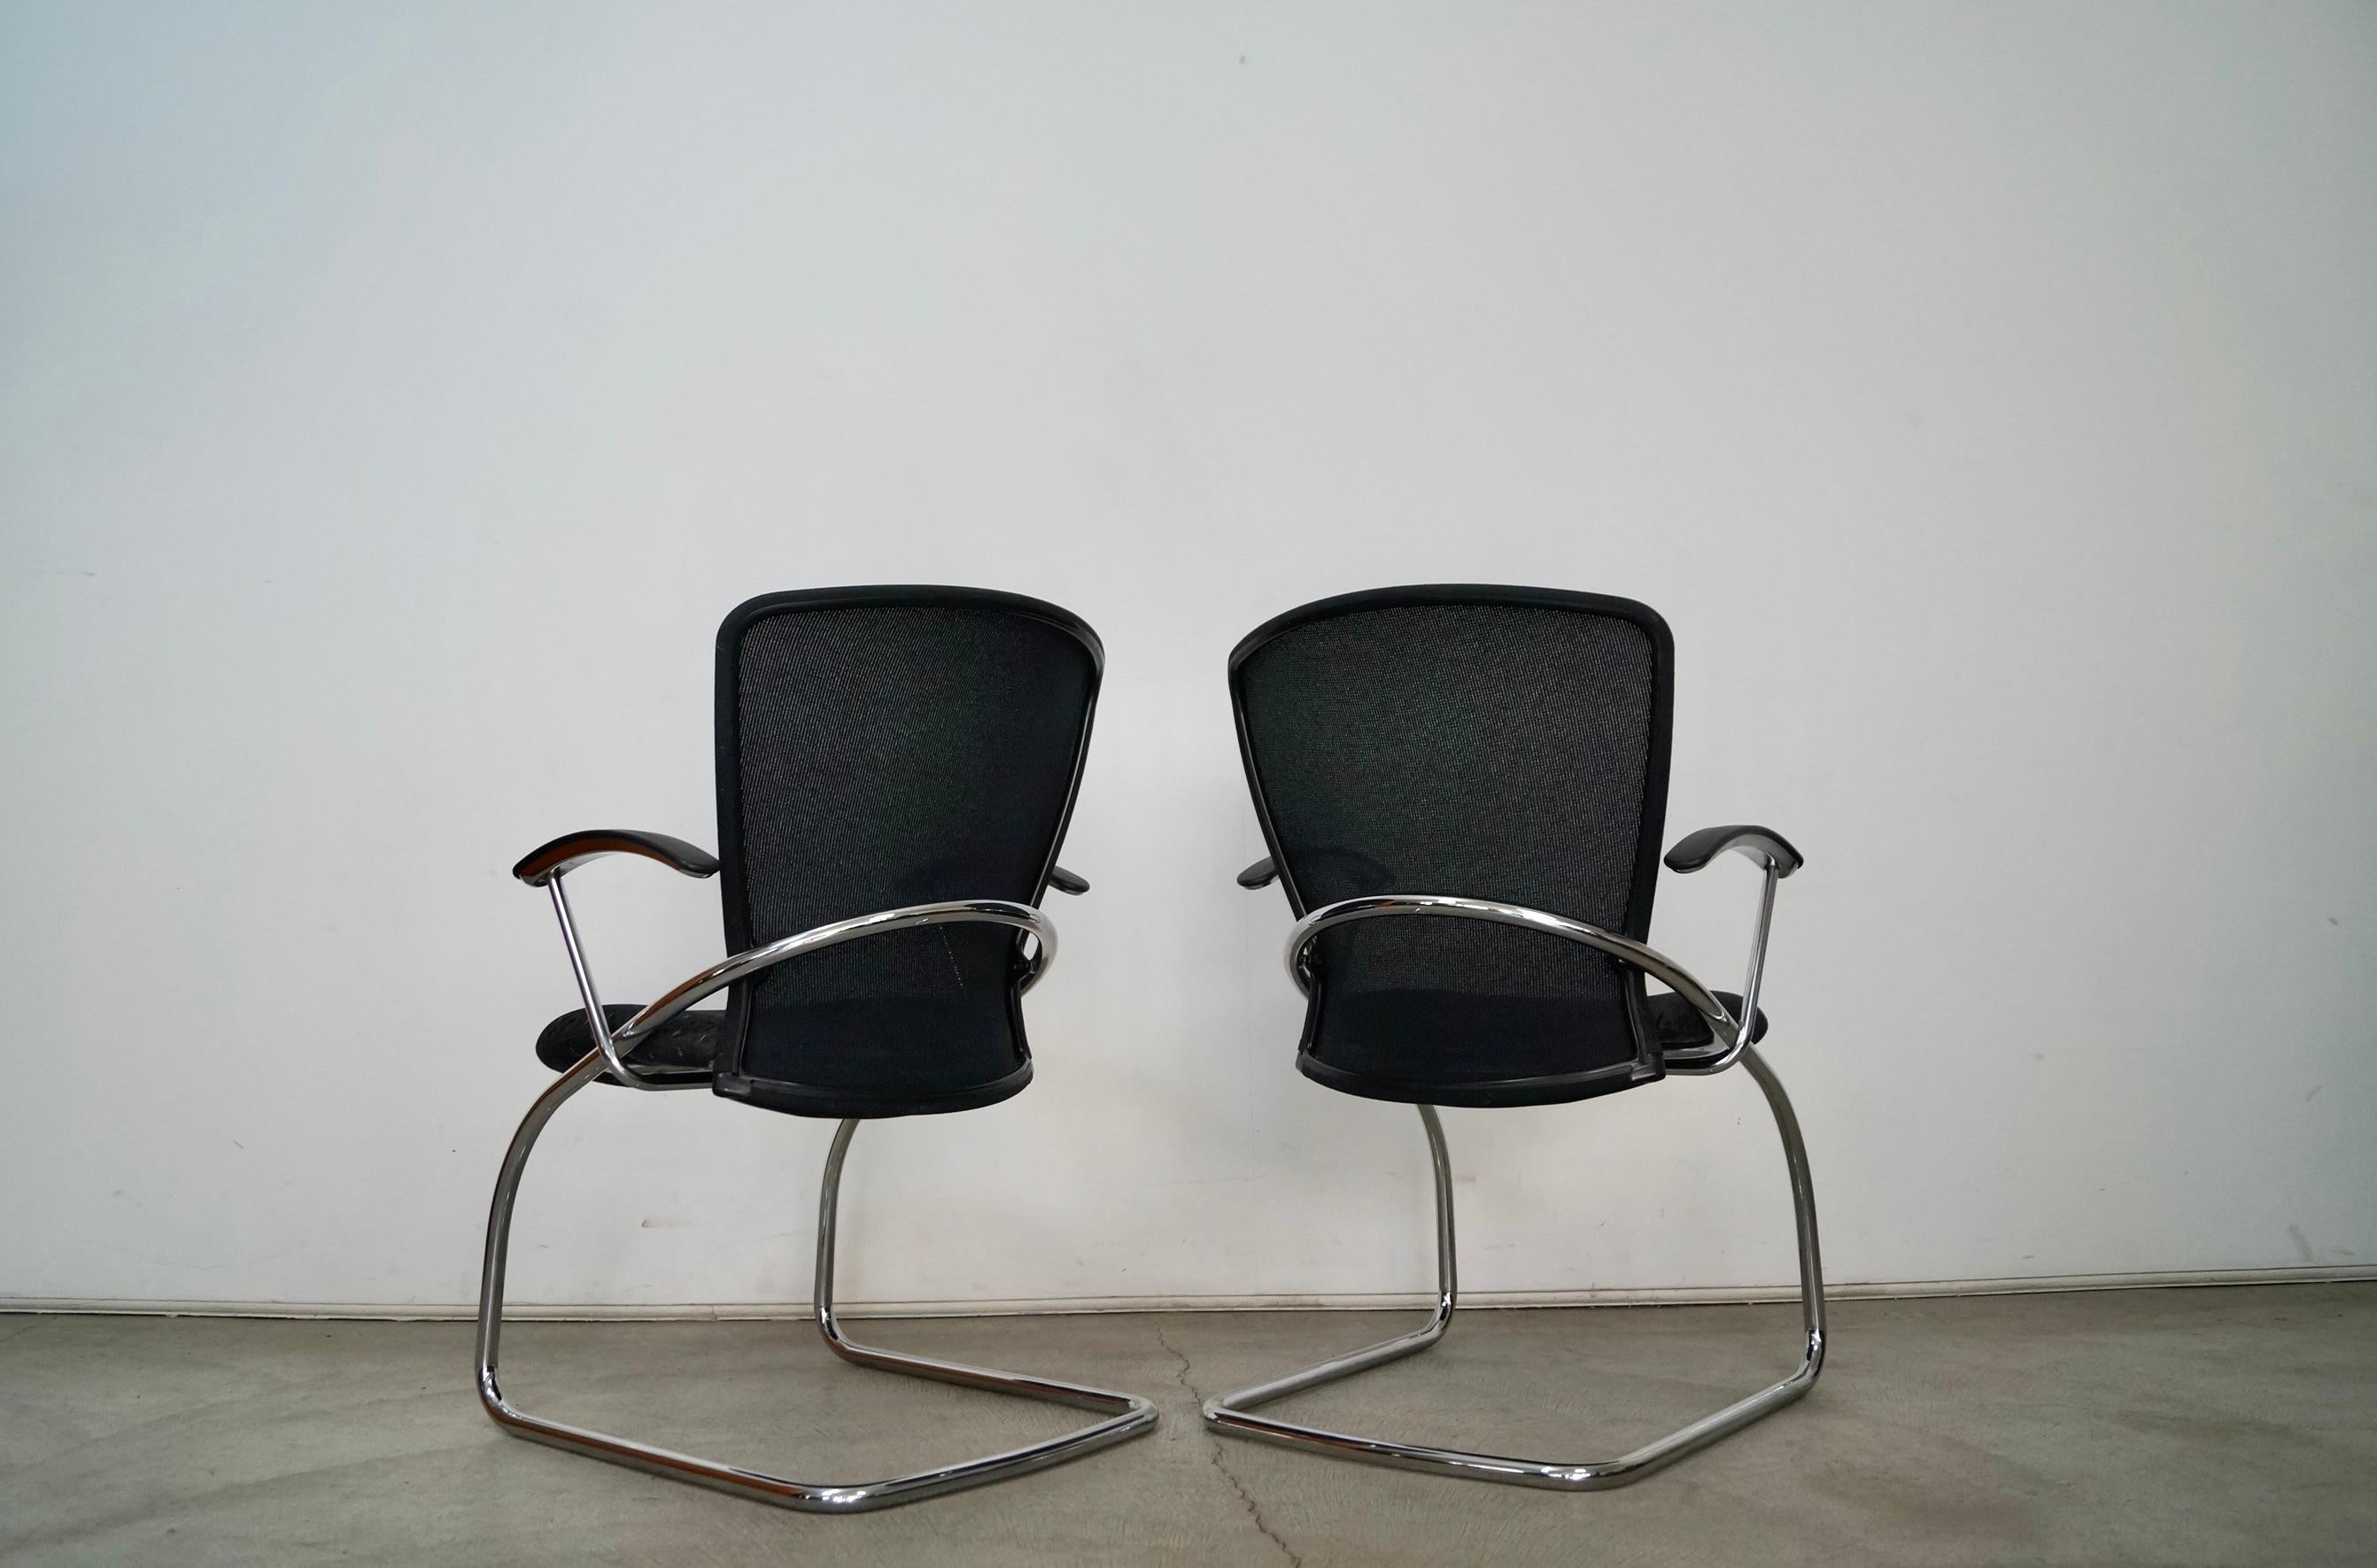 1990's Postmodern German Chrome Cantilever Arm Chairs - A Pair For Sale 2